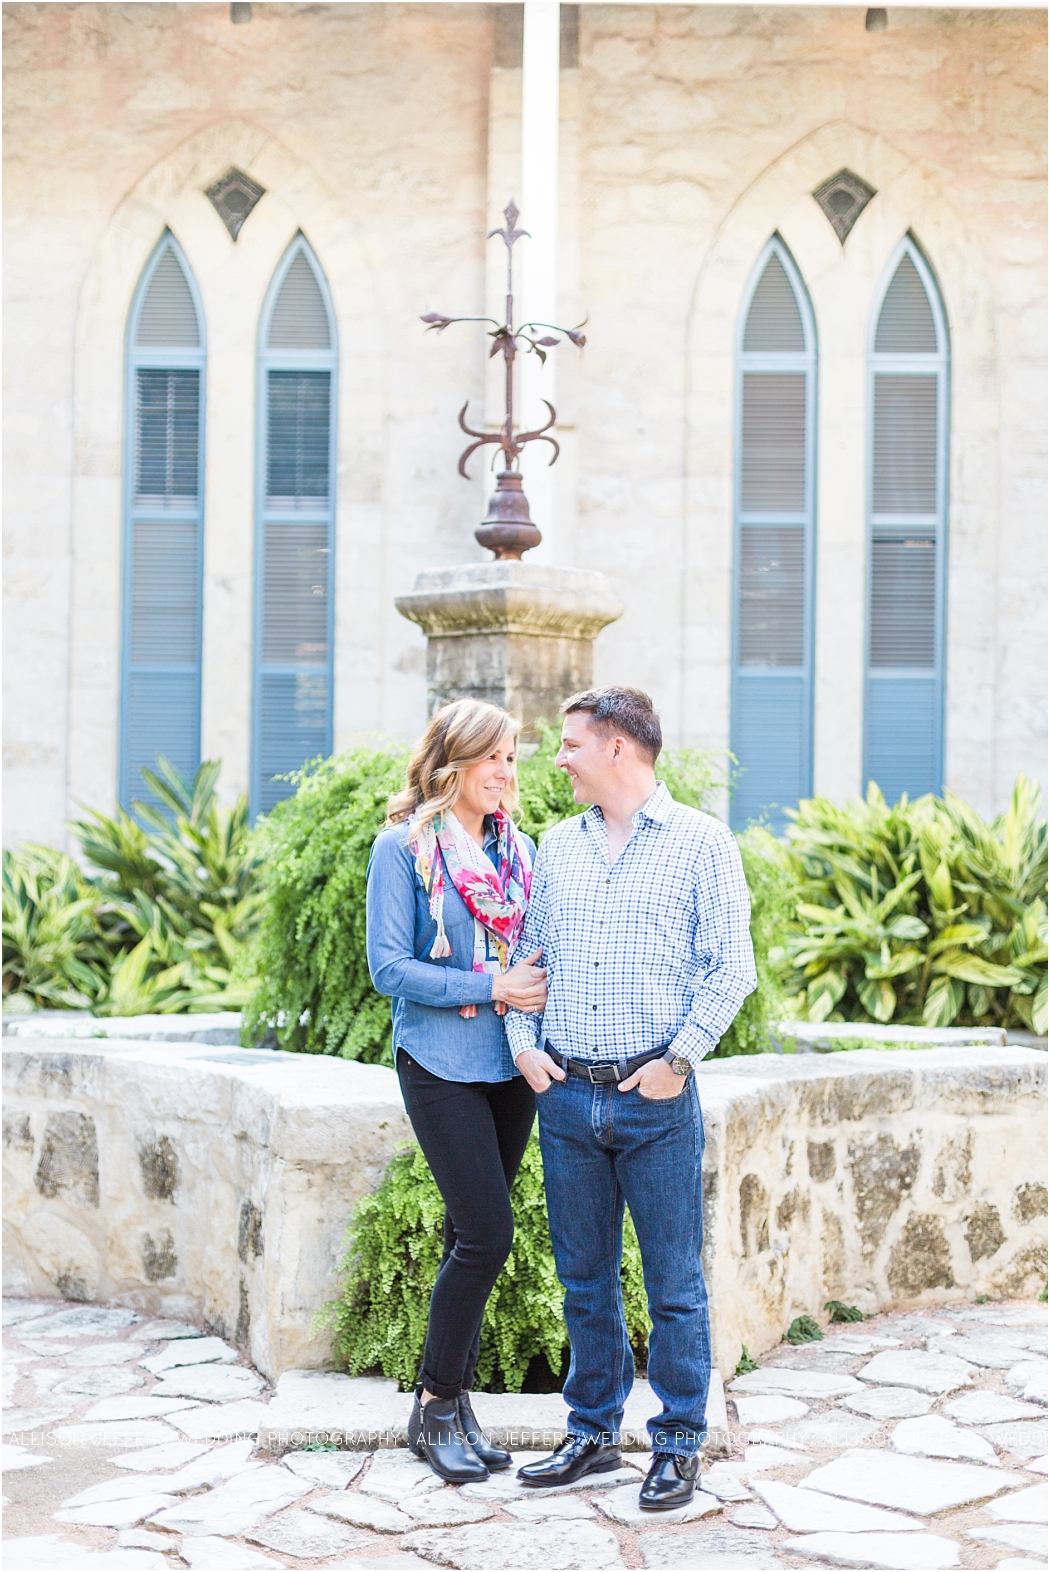 a-fall-engagement-session-at-southwest-school-of-art-in-san-antonio-by-allison-jeffers-wedding-photography_0001